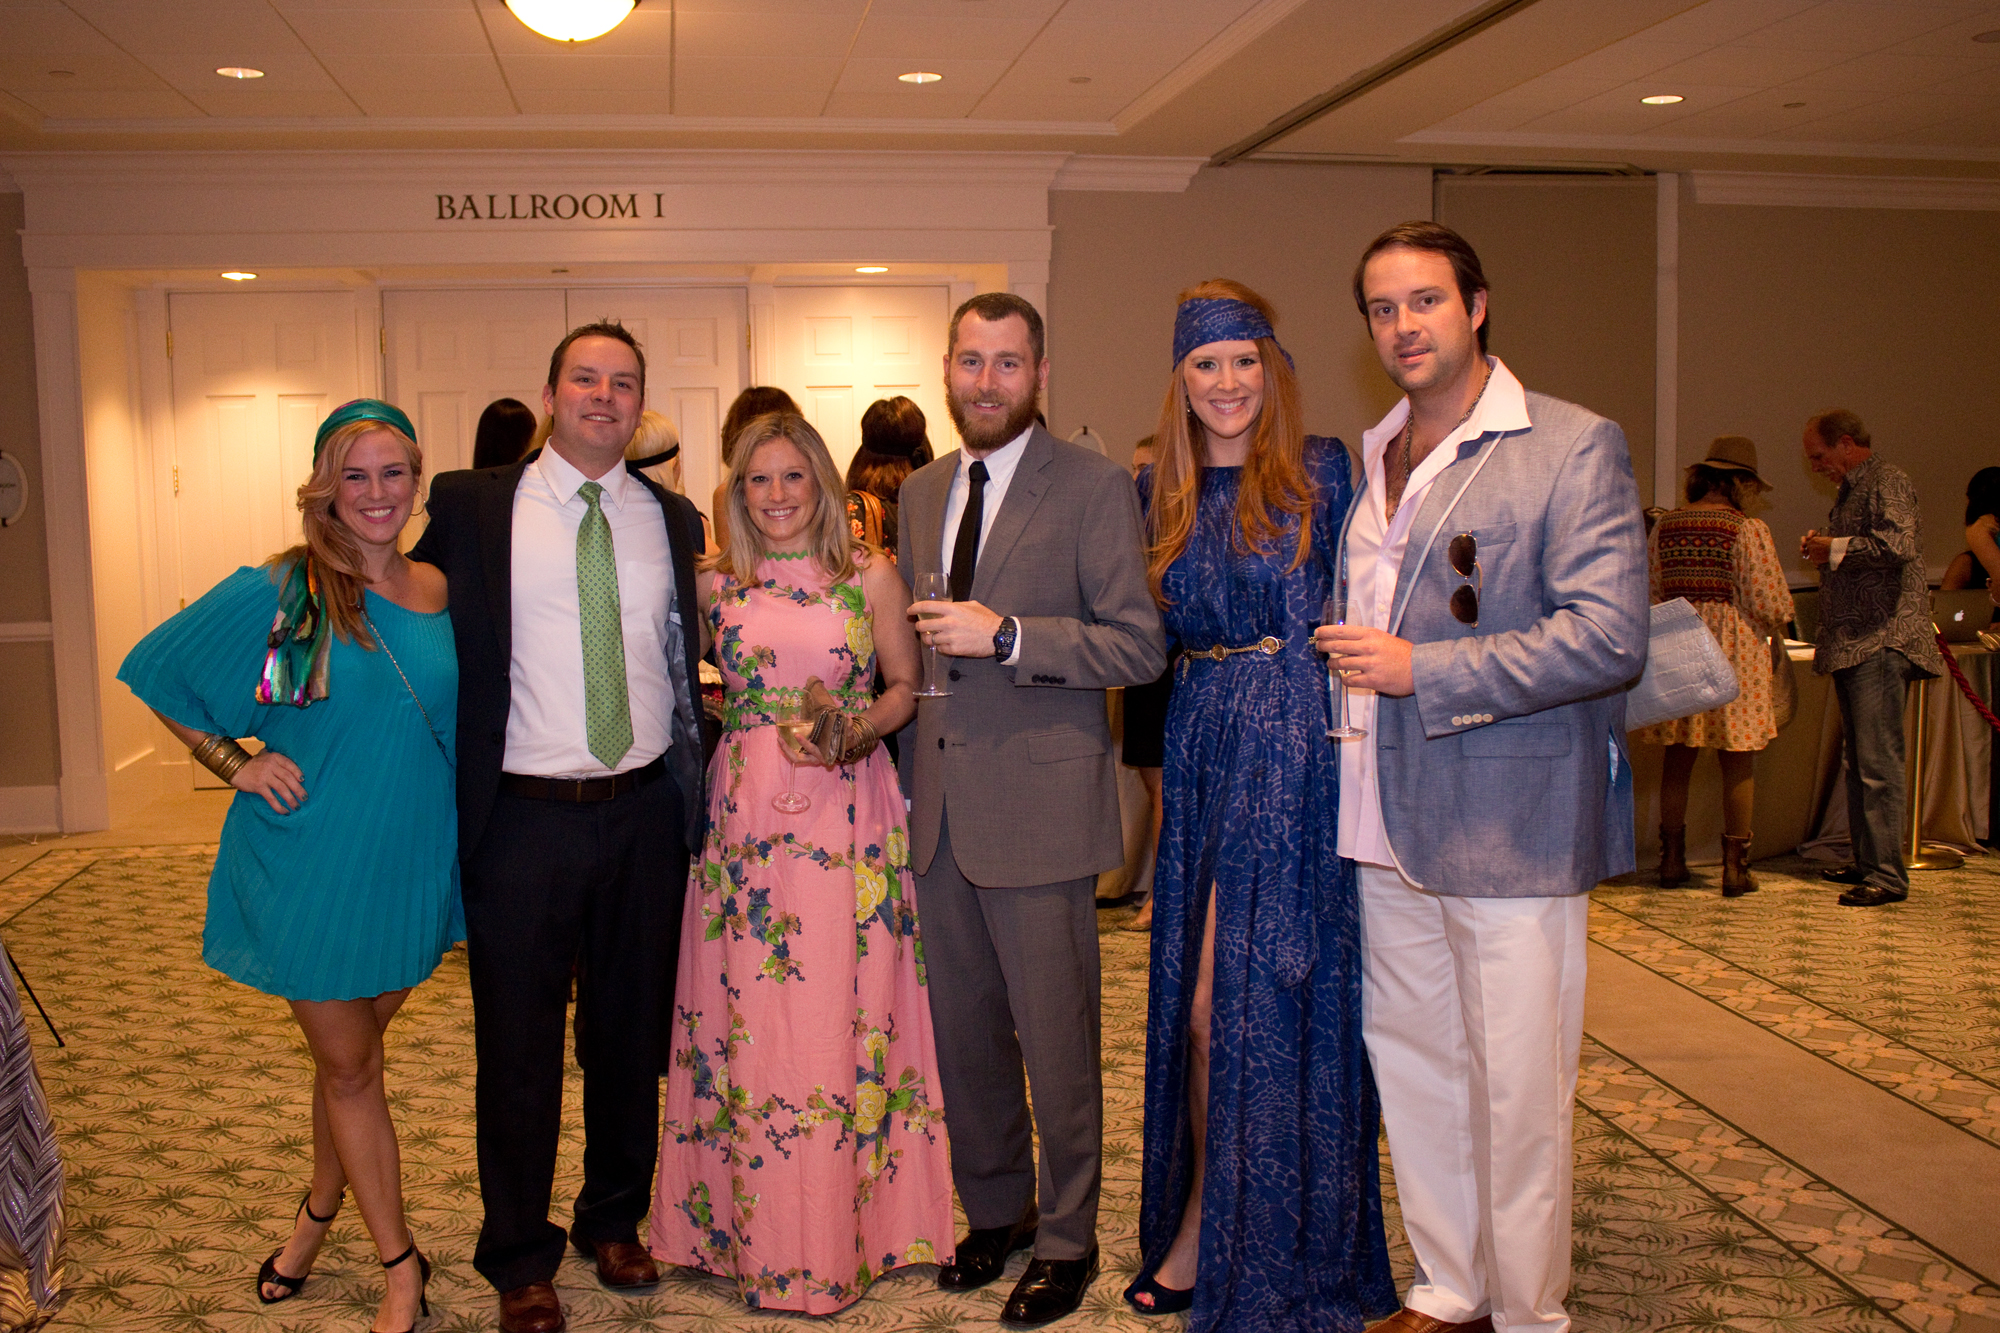 Charleston Magazine Club director Angharad Chester-Jones with Stephen Williams, Susie Armstrong-Tracey, Greg Tracey, Meredith Siemans, and Jonathan Tibbs